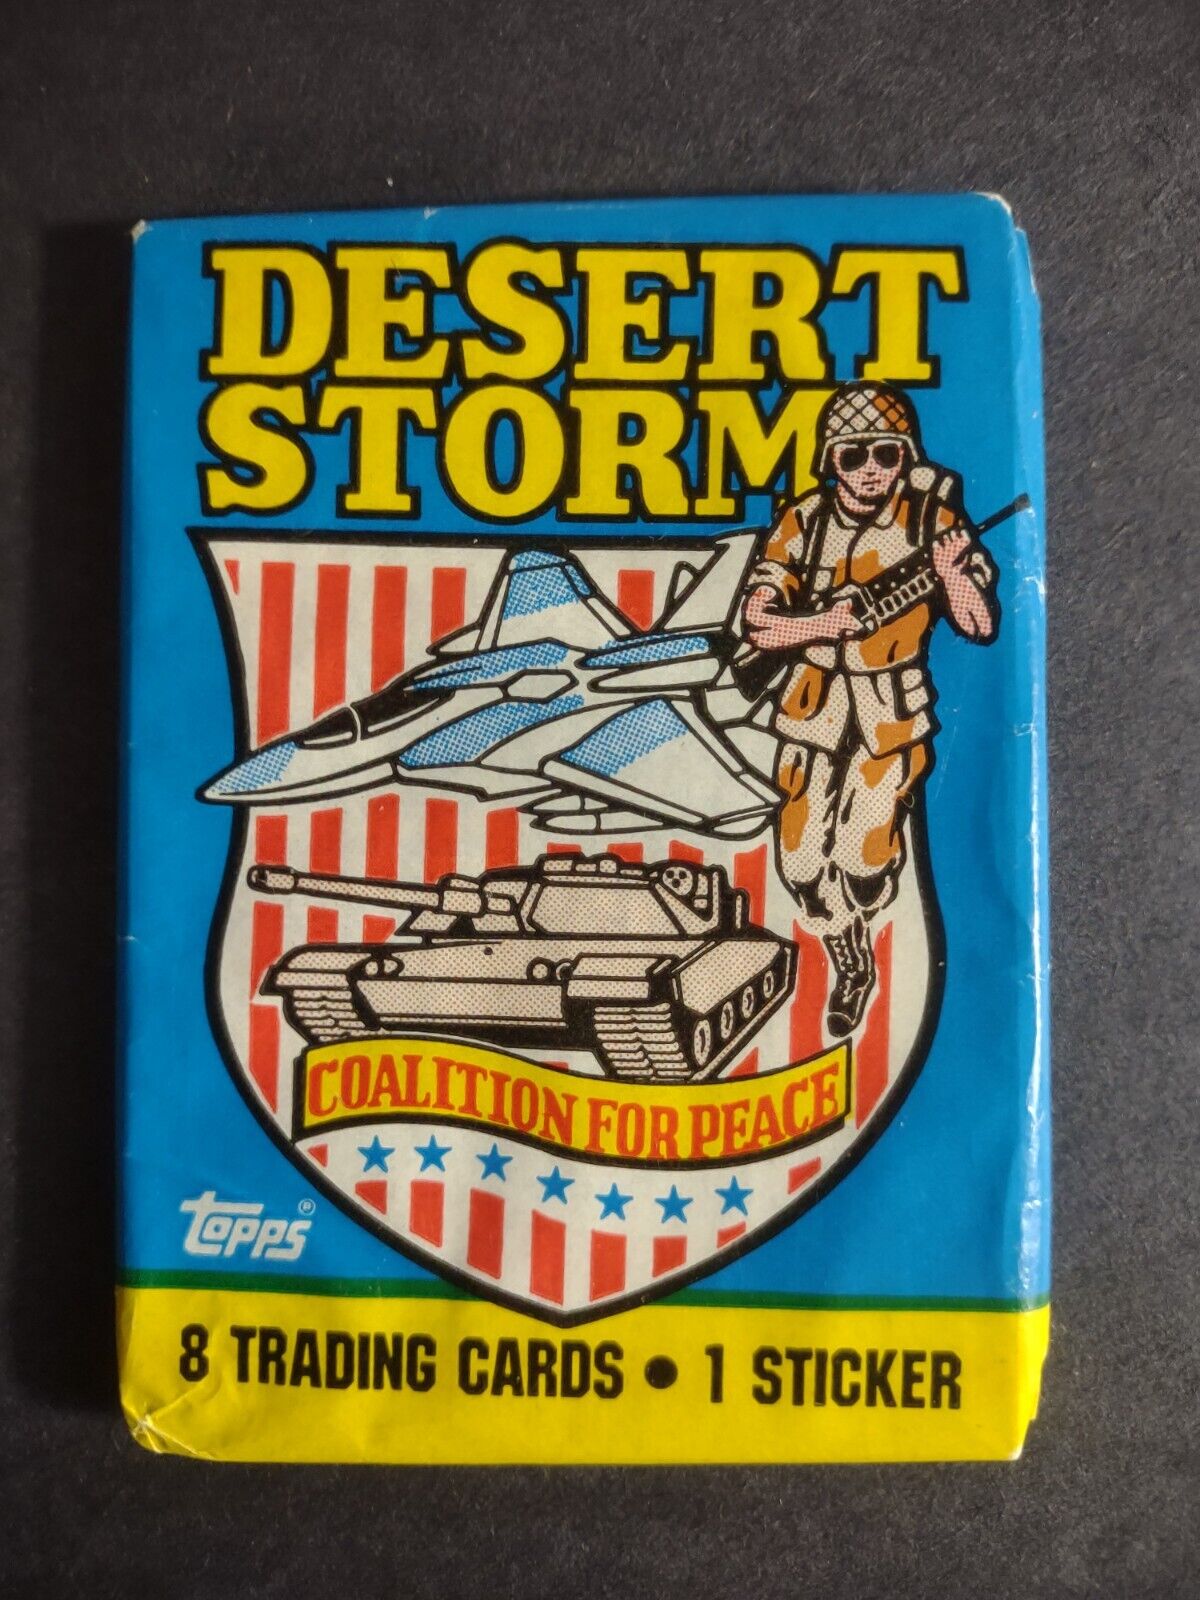 1991 Desert Storm Coalition For Peace Trading Cards Unopened Pack